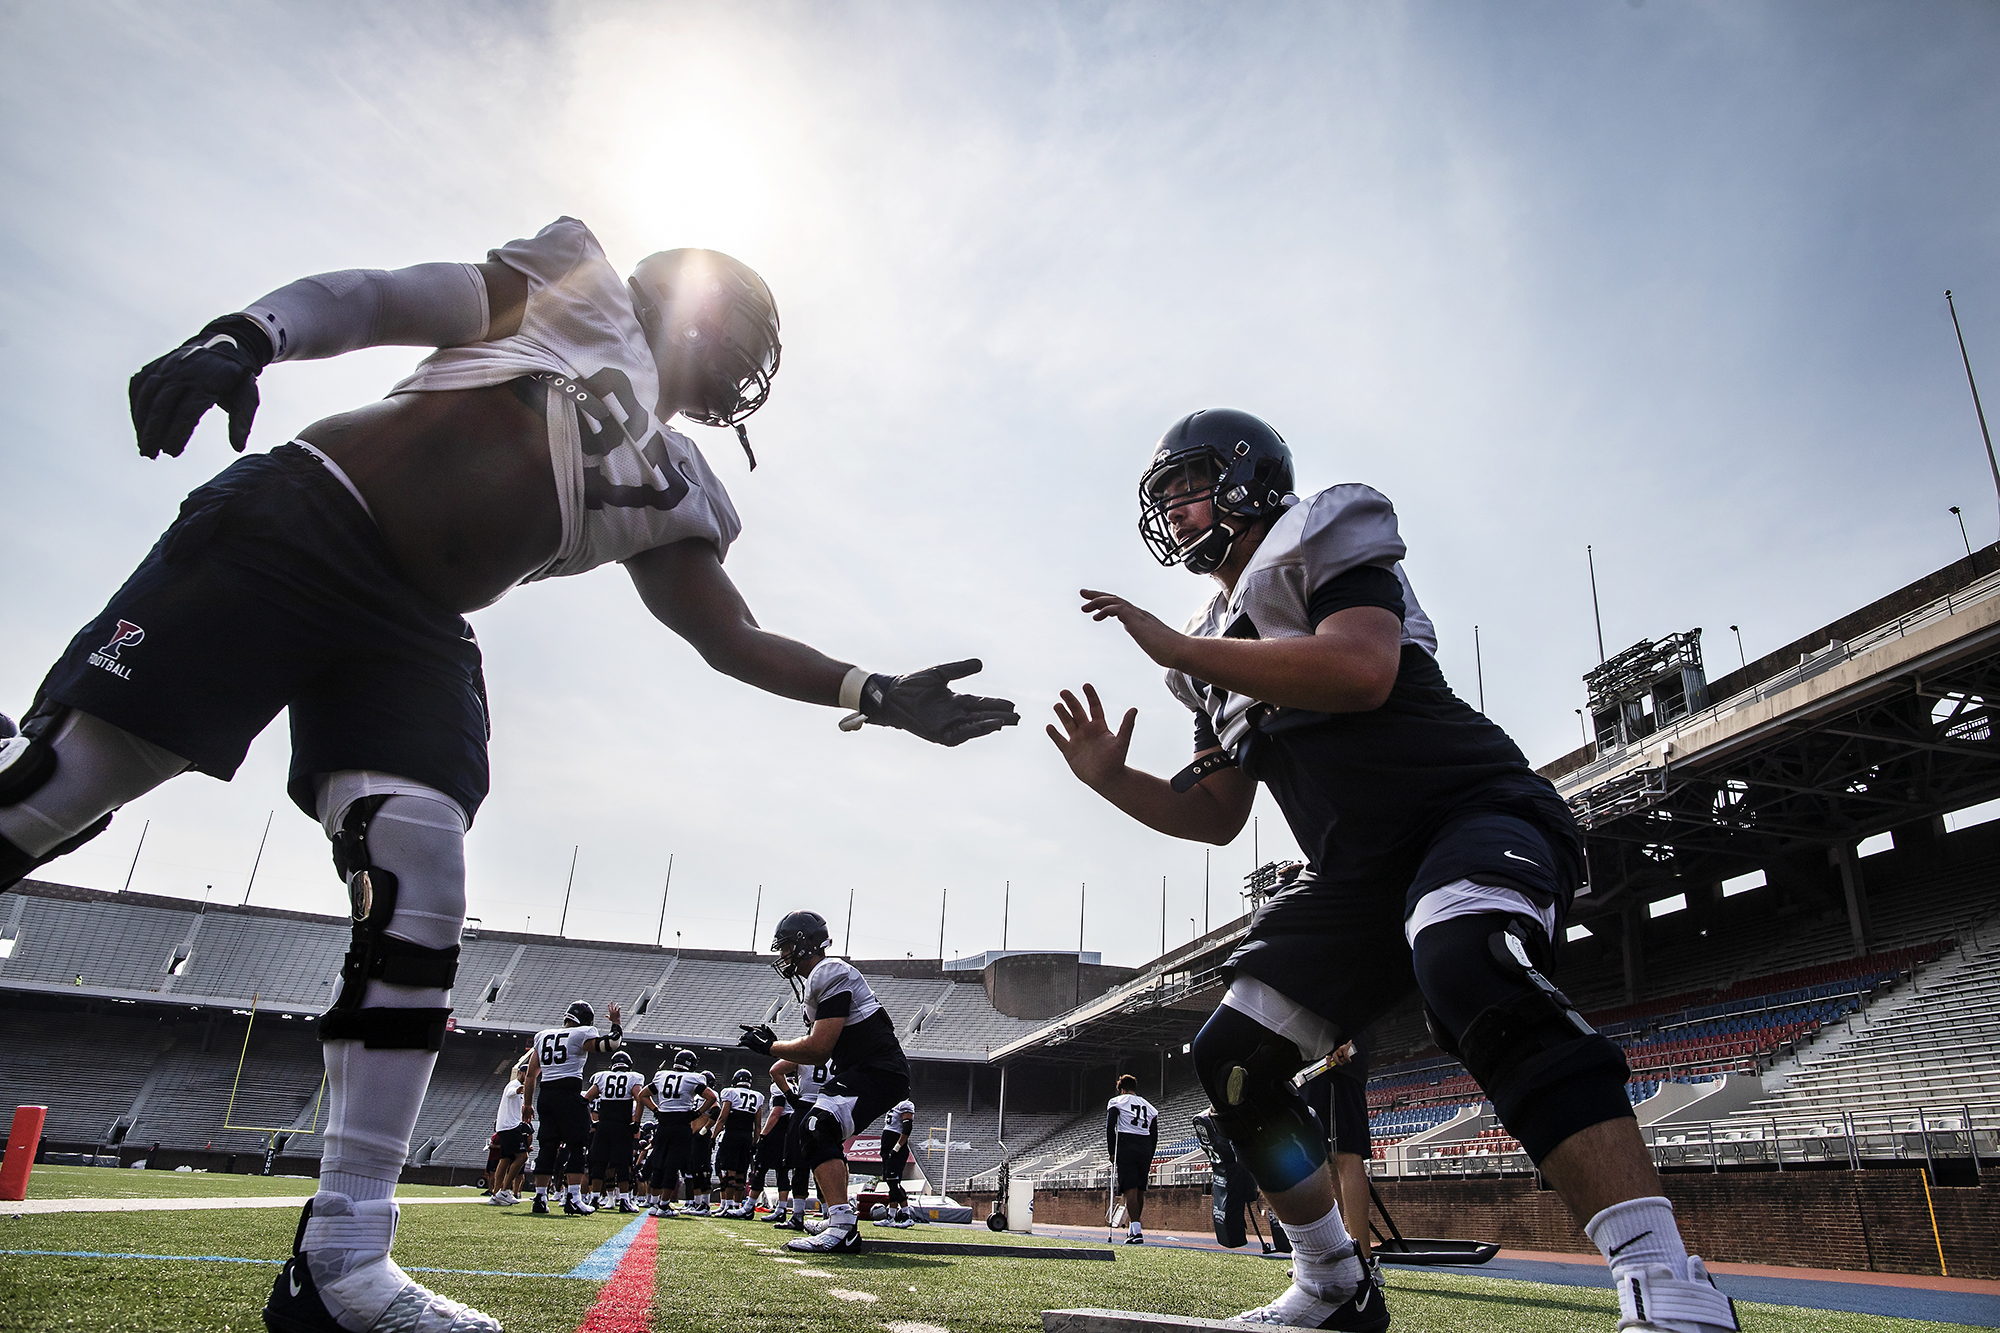 One player sticks his hand out to an offensive lineman during practice at Franklin Field.